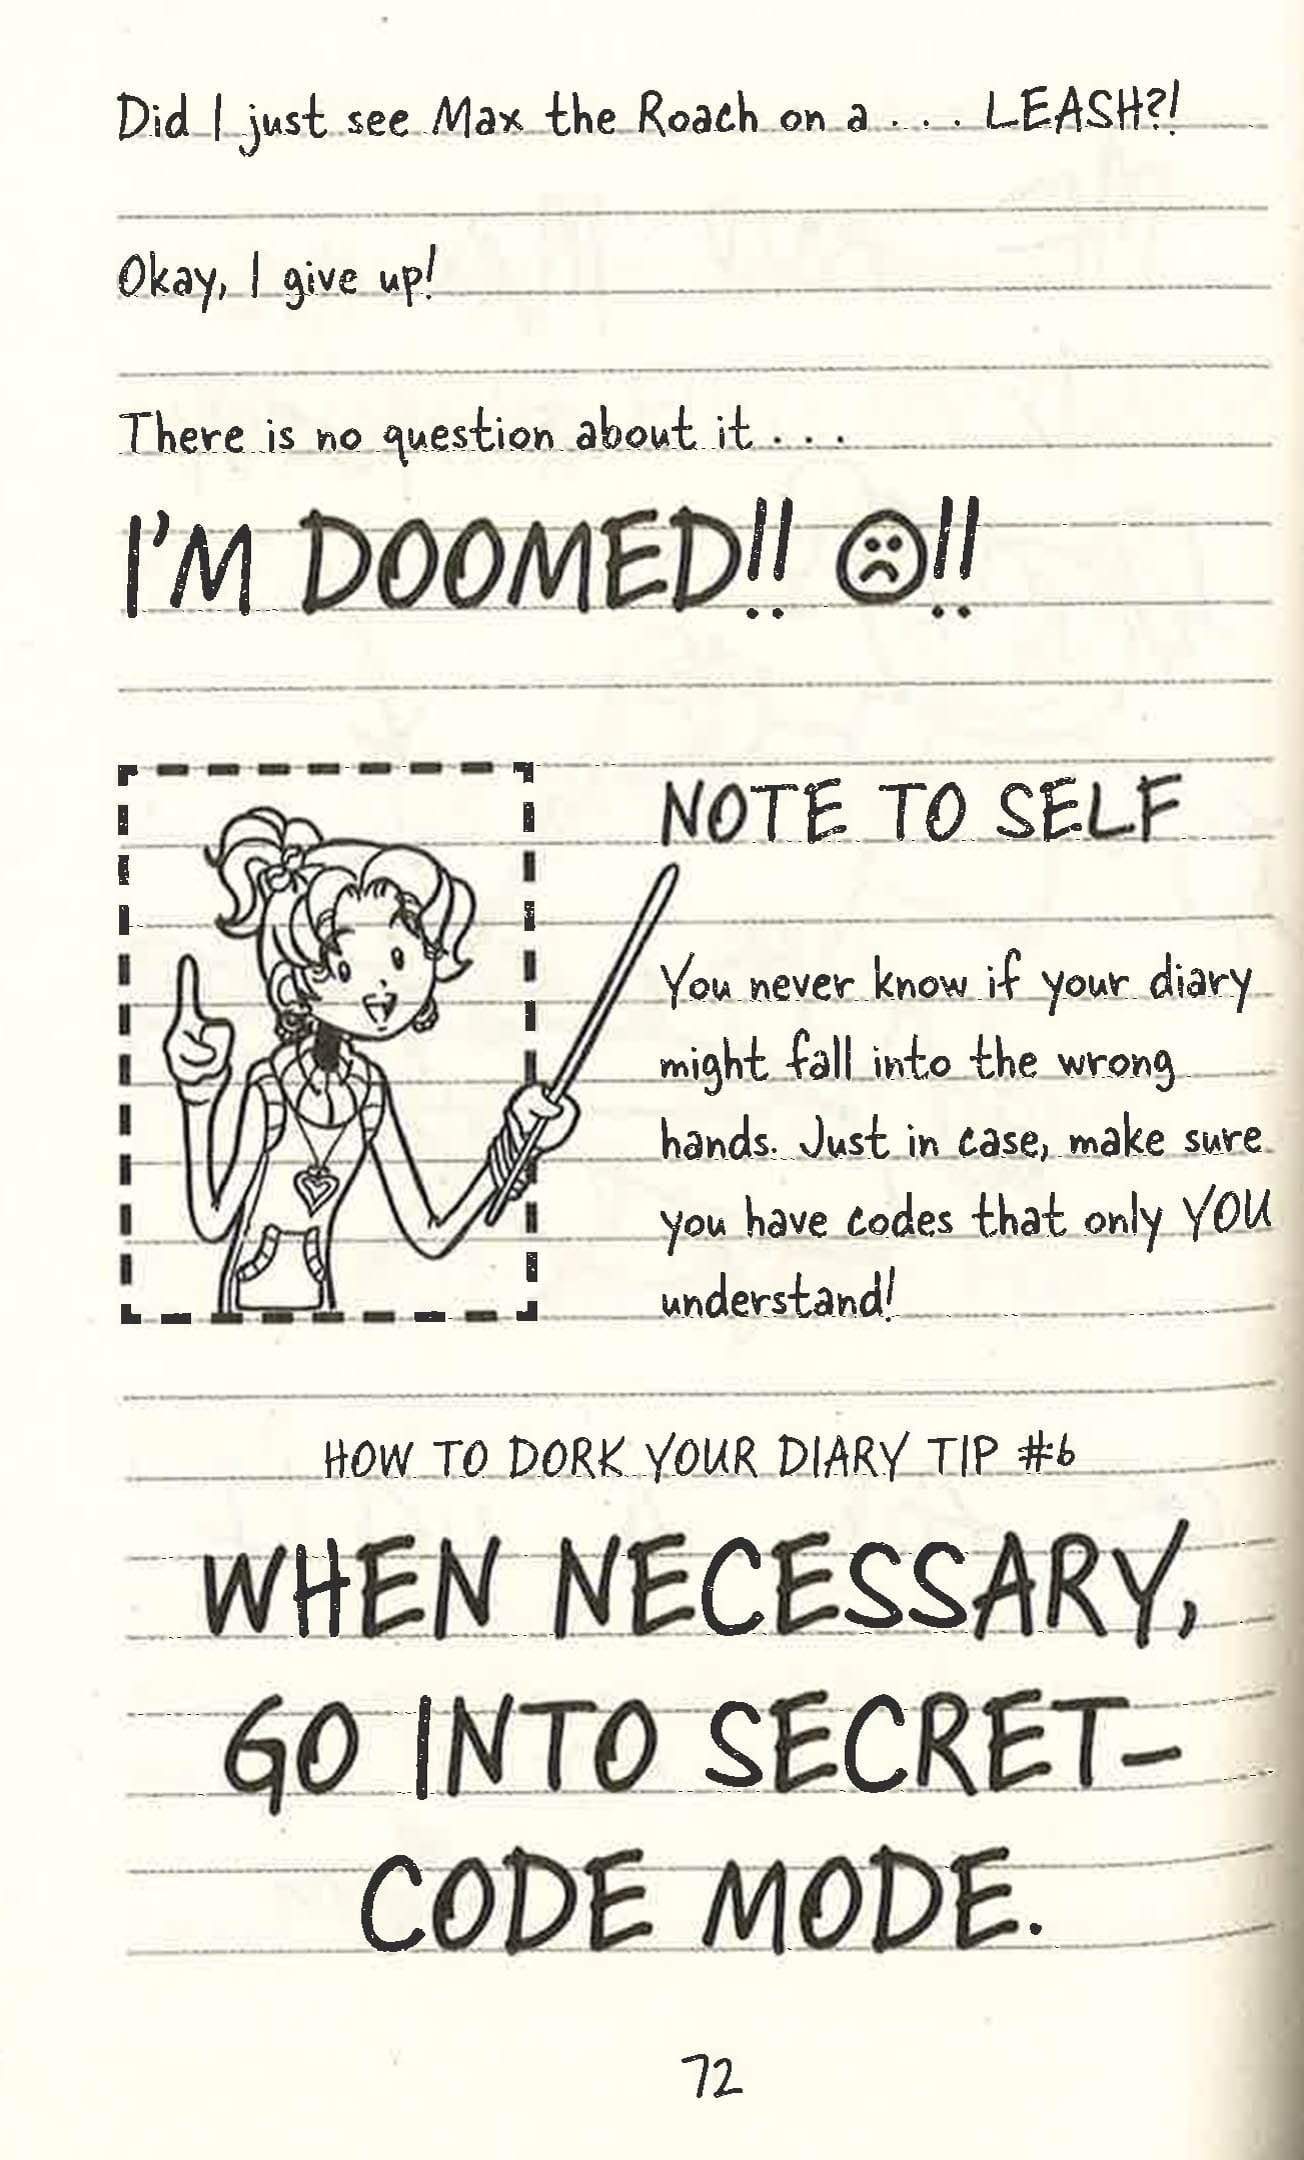 Dork Diaries: How To Dork Your Diary